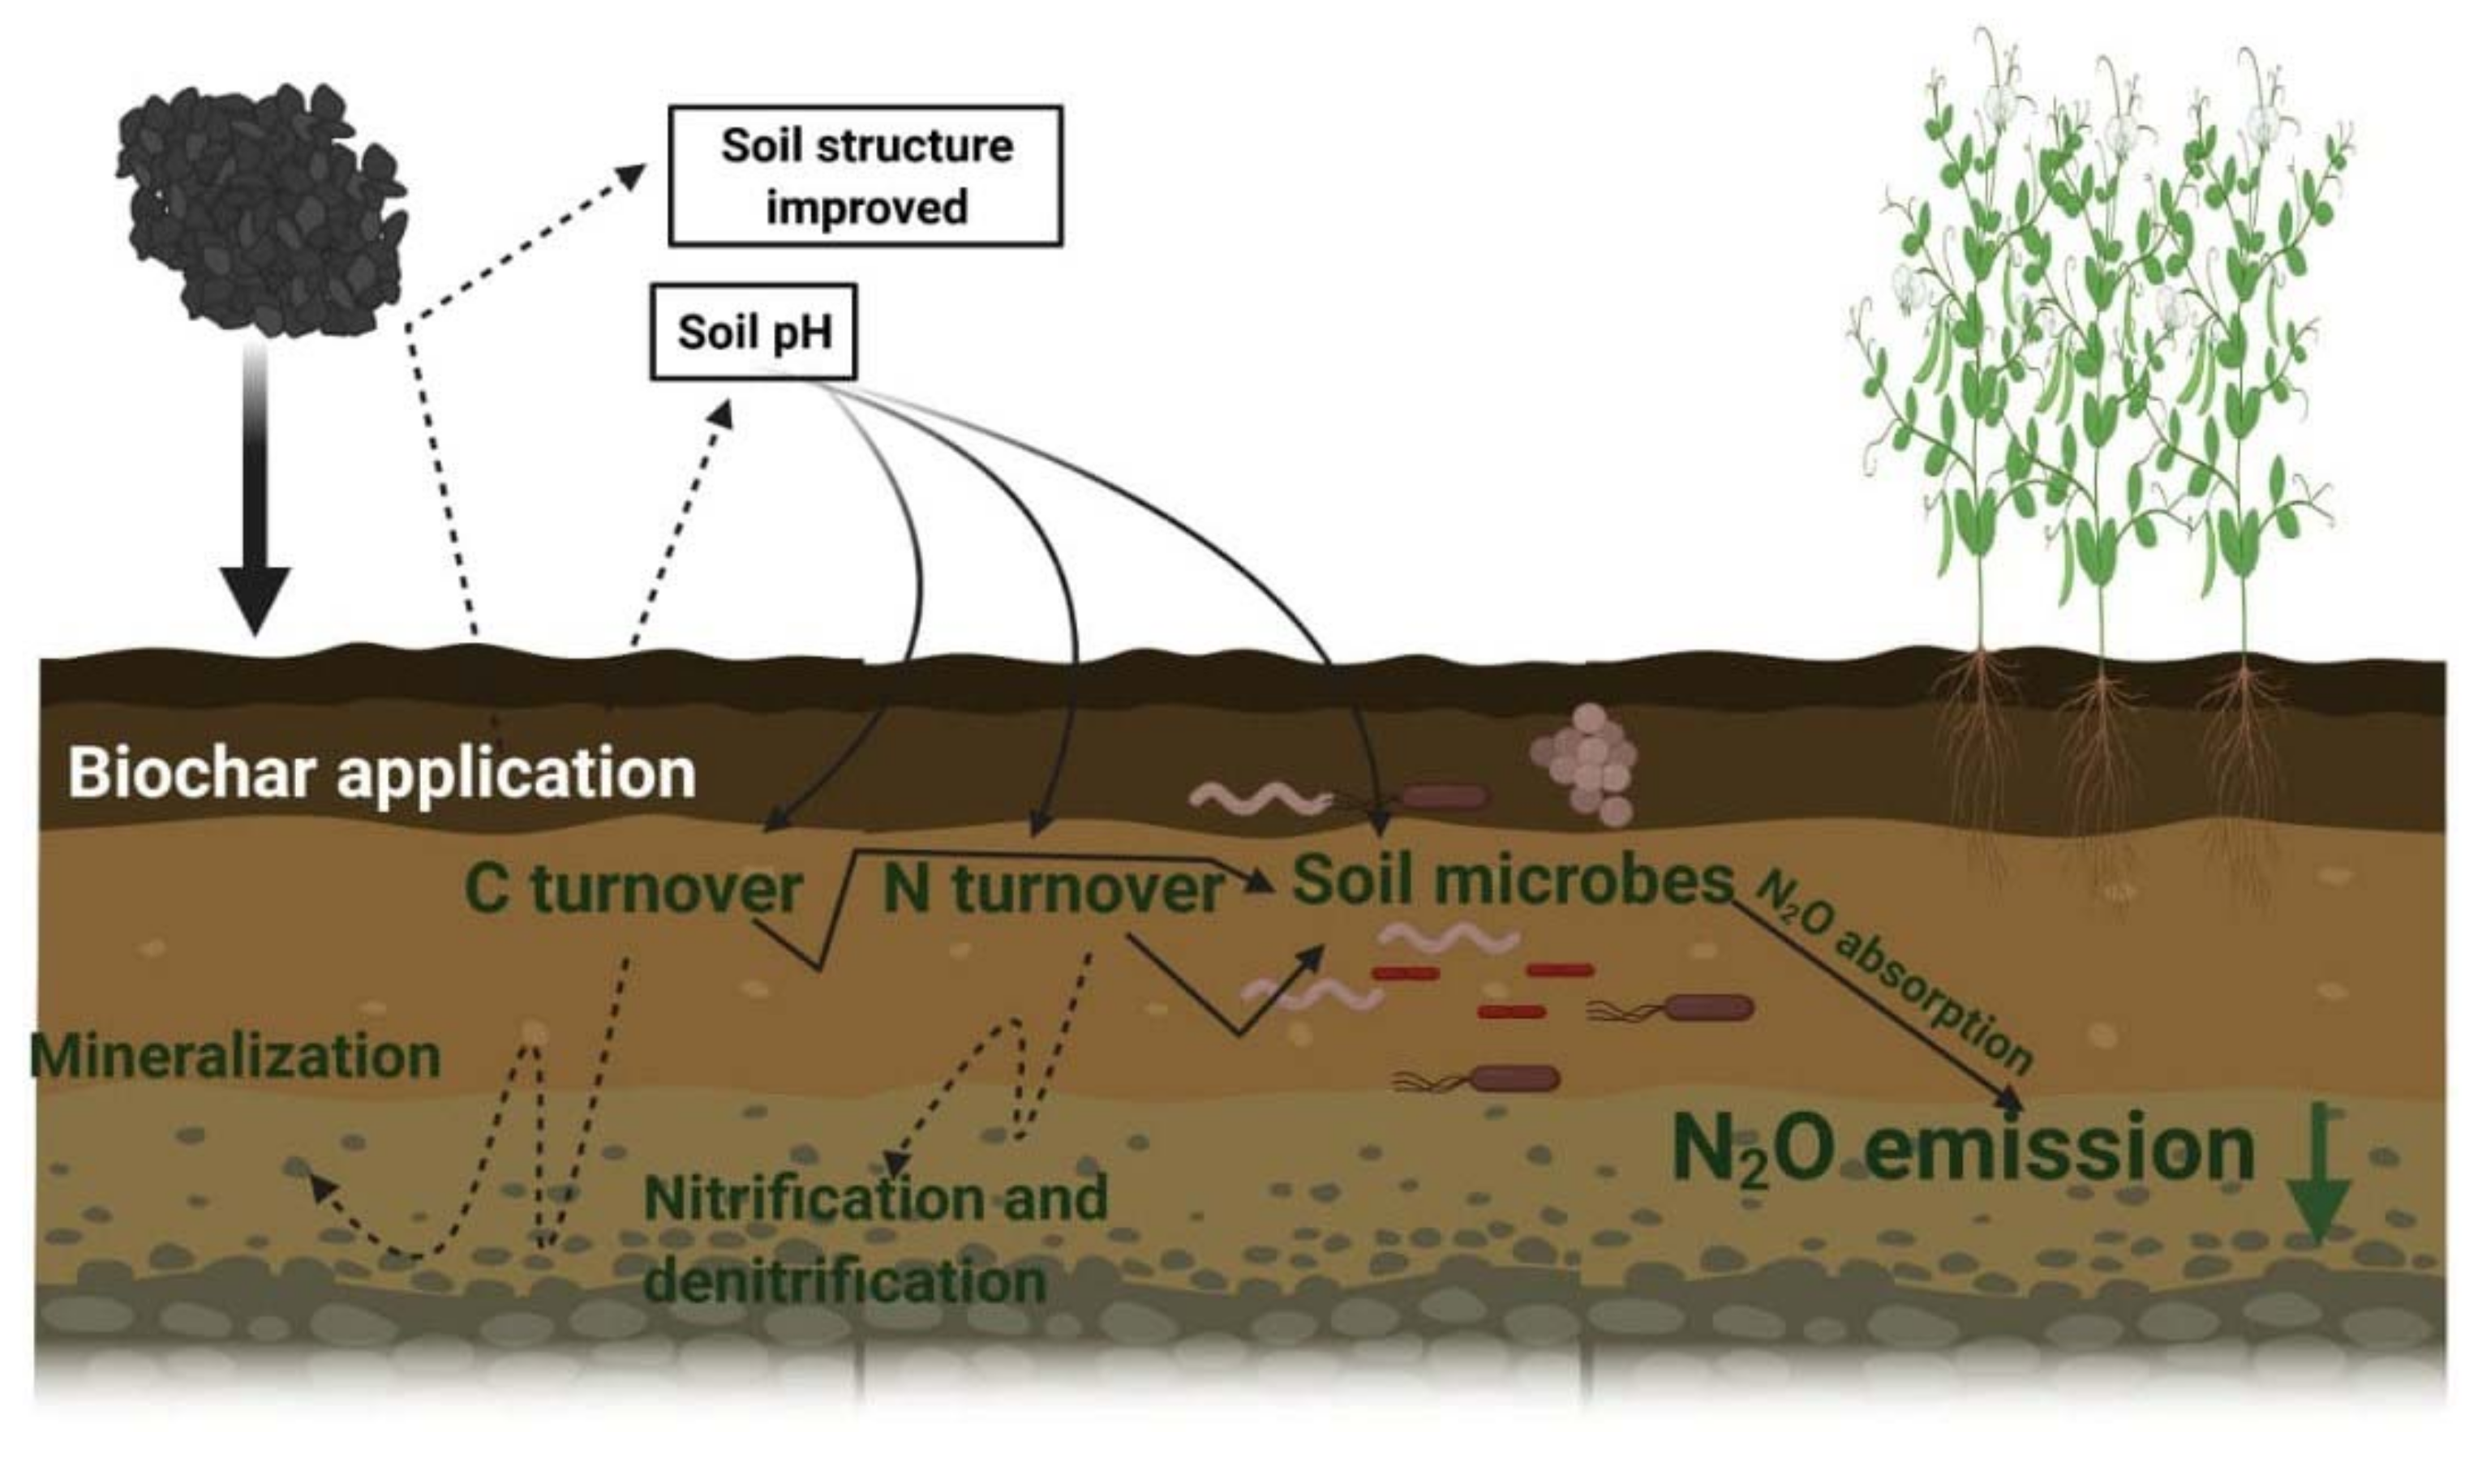 Emissions of nitrous oxide (N2O) from soil surfaces and their